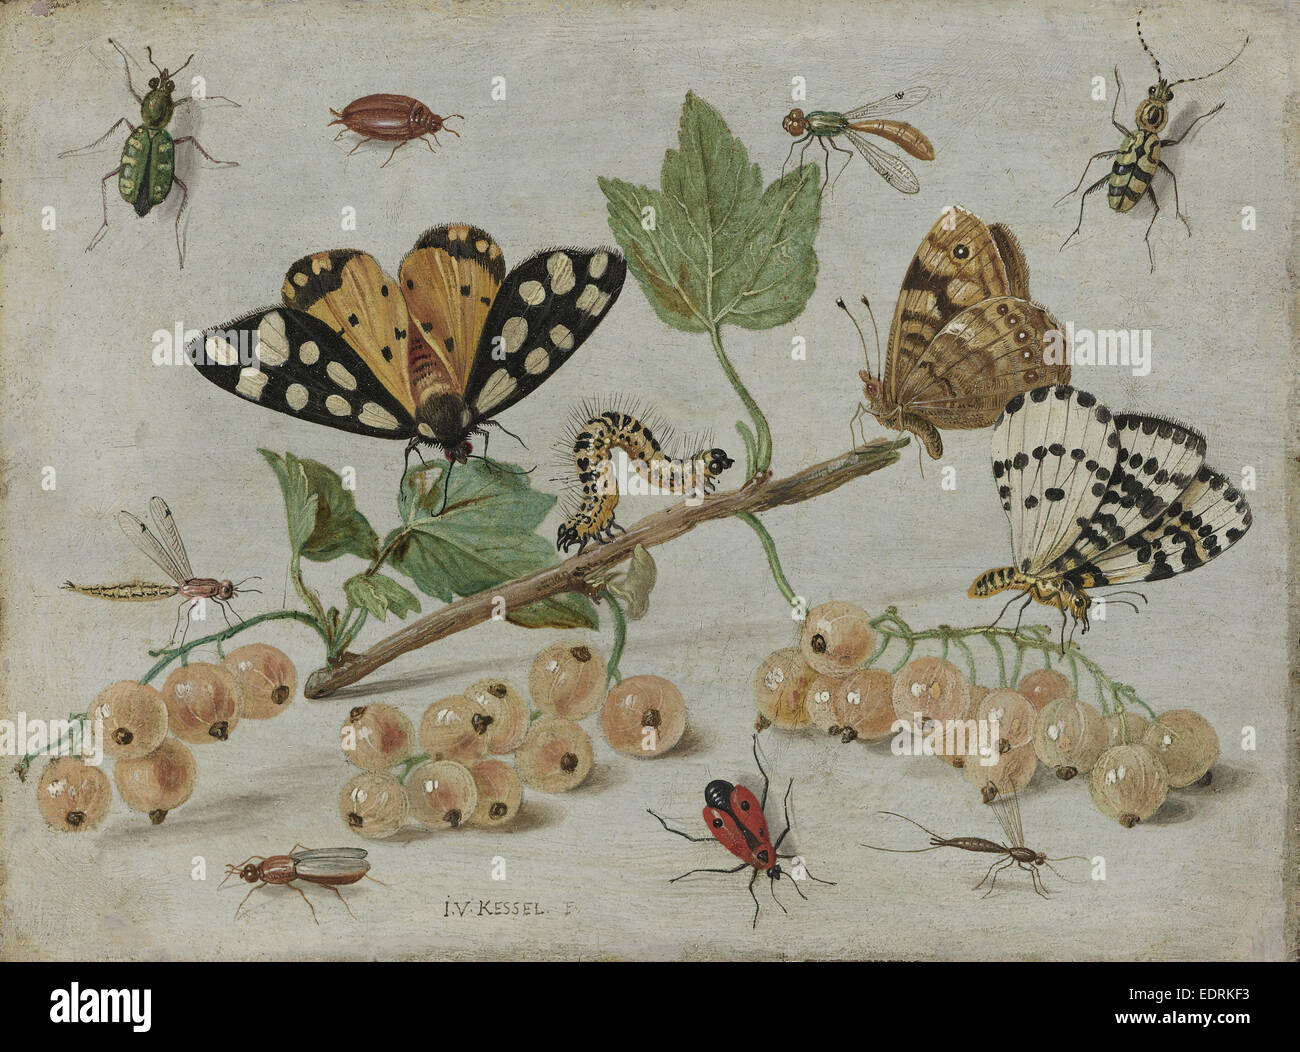 Insects and Fruit, Jan van Kessel, I, c. 1660 - c. 1665 Stock Photo - Alamy